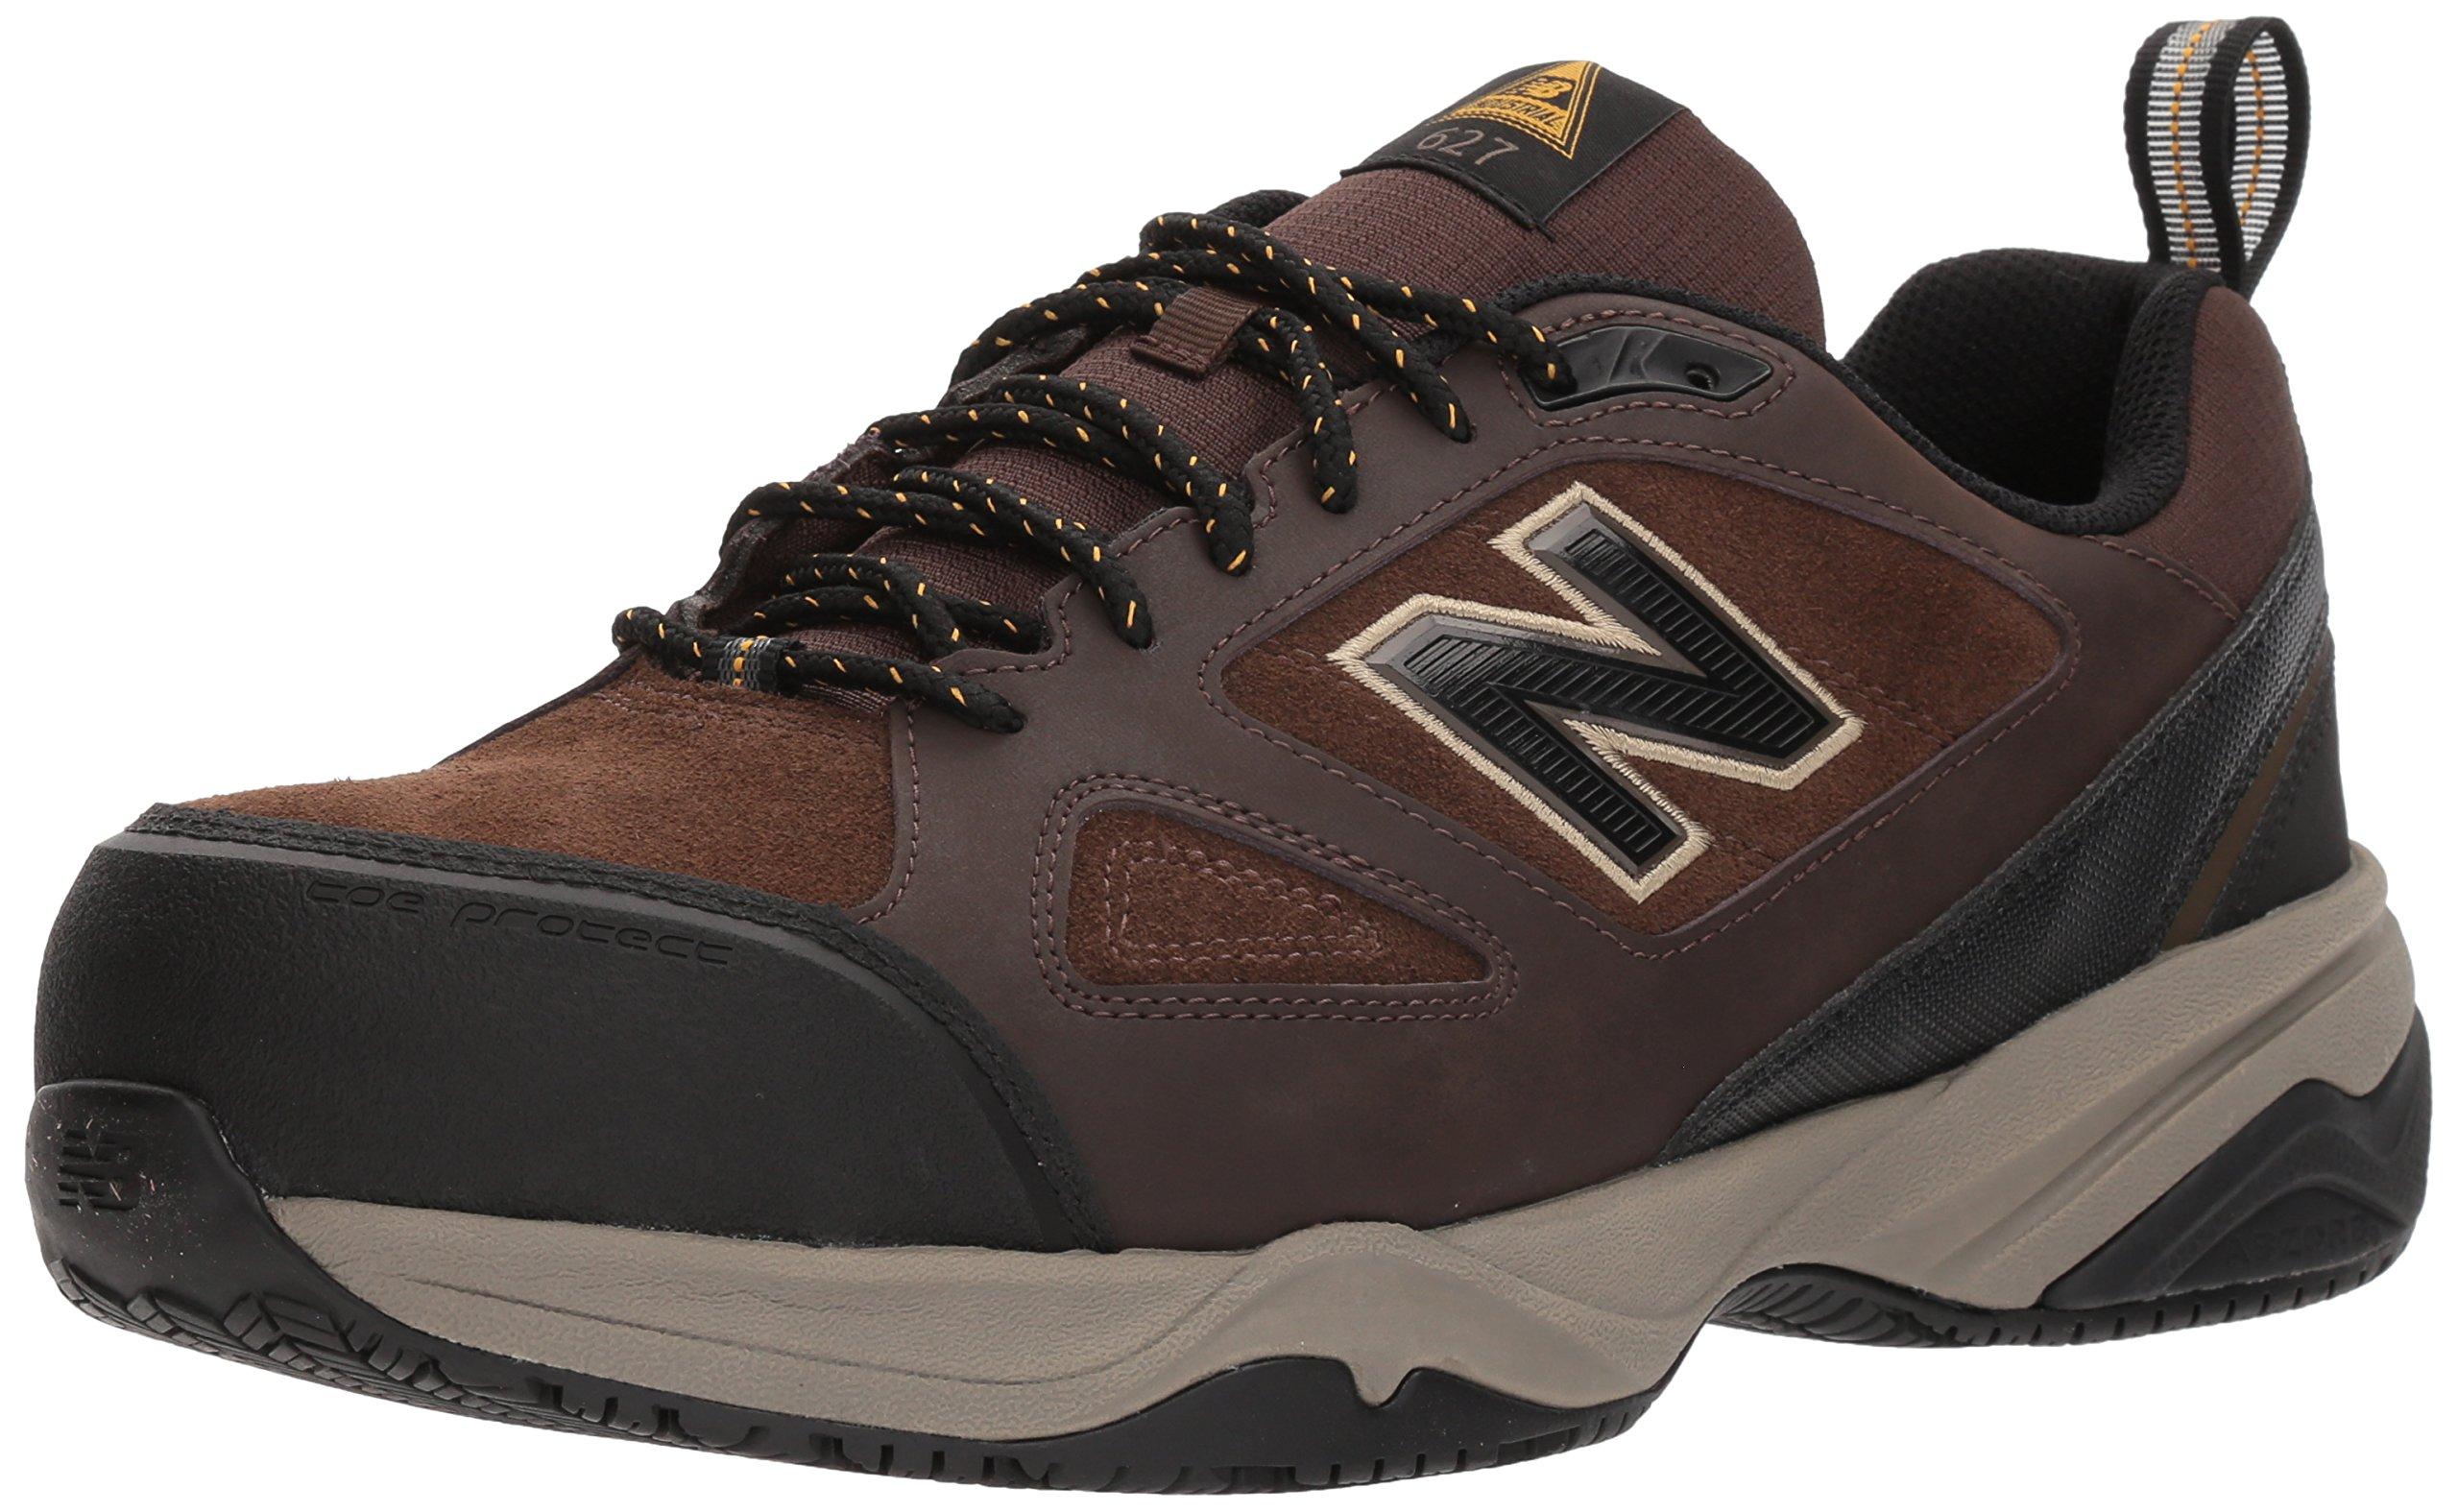 New Balance Steel Toe 627 V2 Industrial Shoe in Brown/Black (Brown) for ...